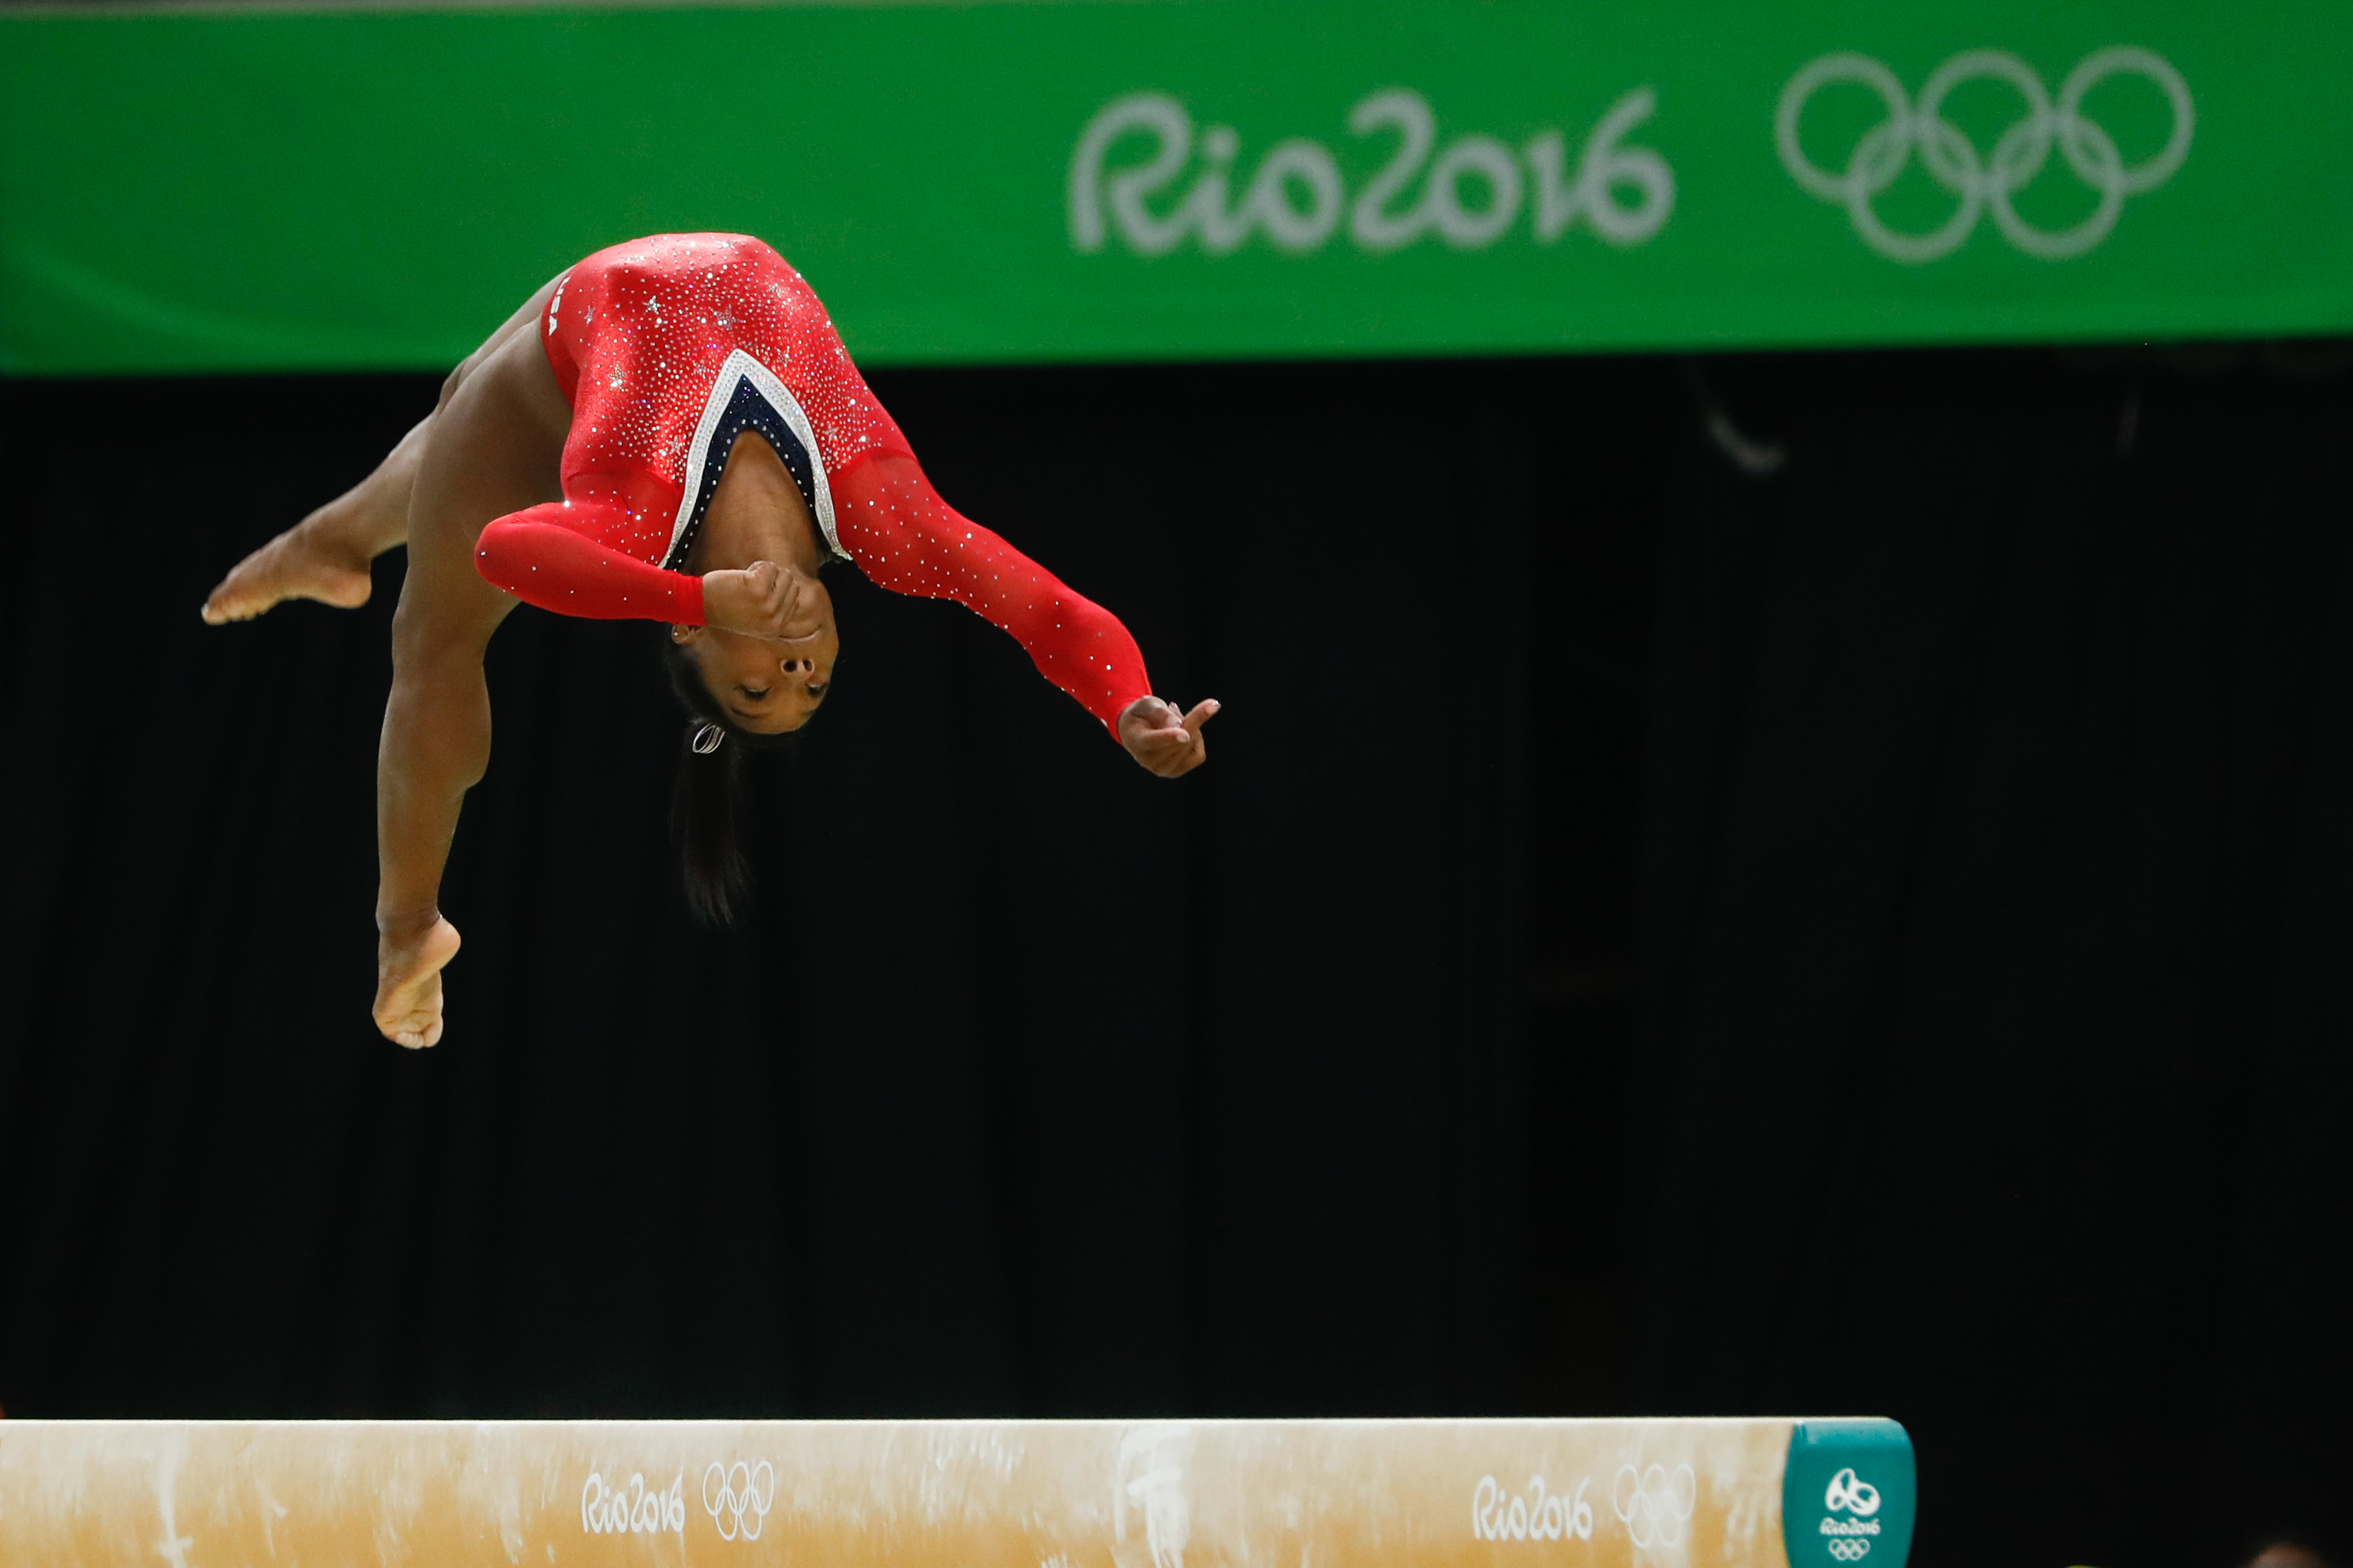 Gymnast Simone Biles These 6 Reasons Make Her A Role Model